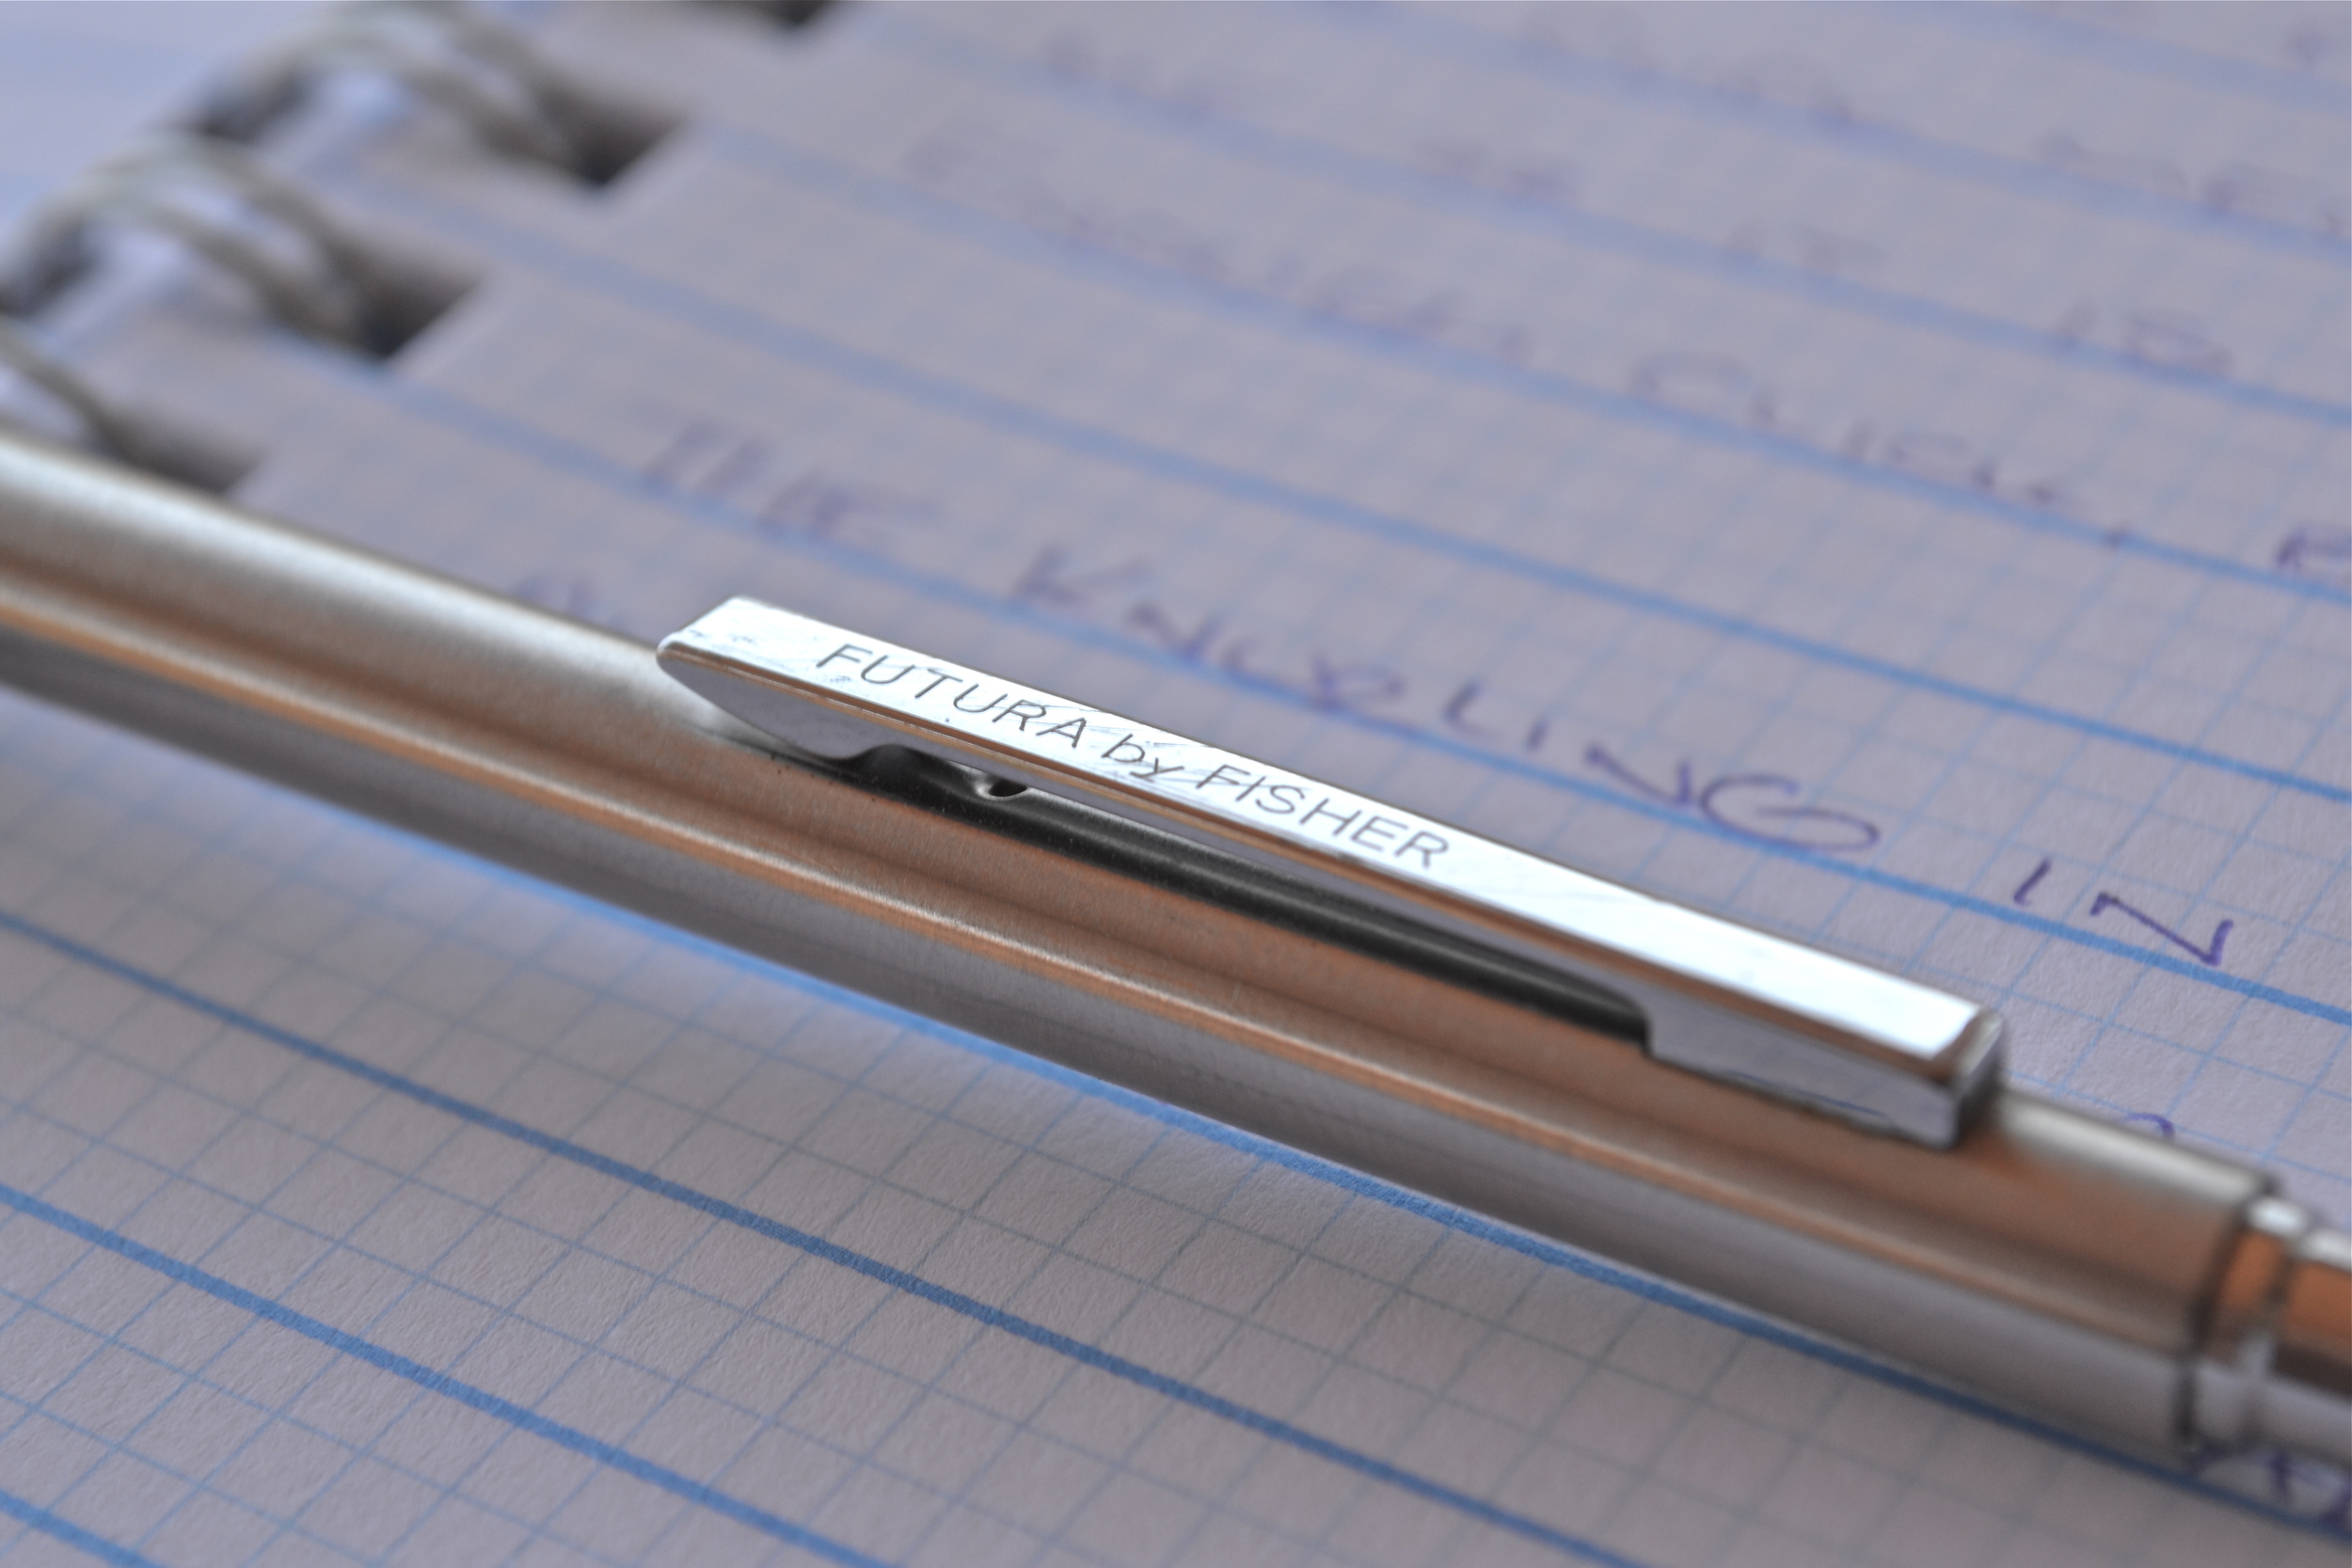 Fisher Futura Brushed Chrome Mechanical Pencil Gift Boxed by Fisher Space Pen